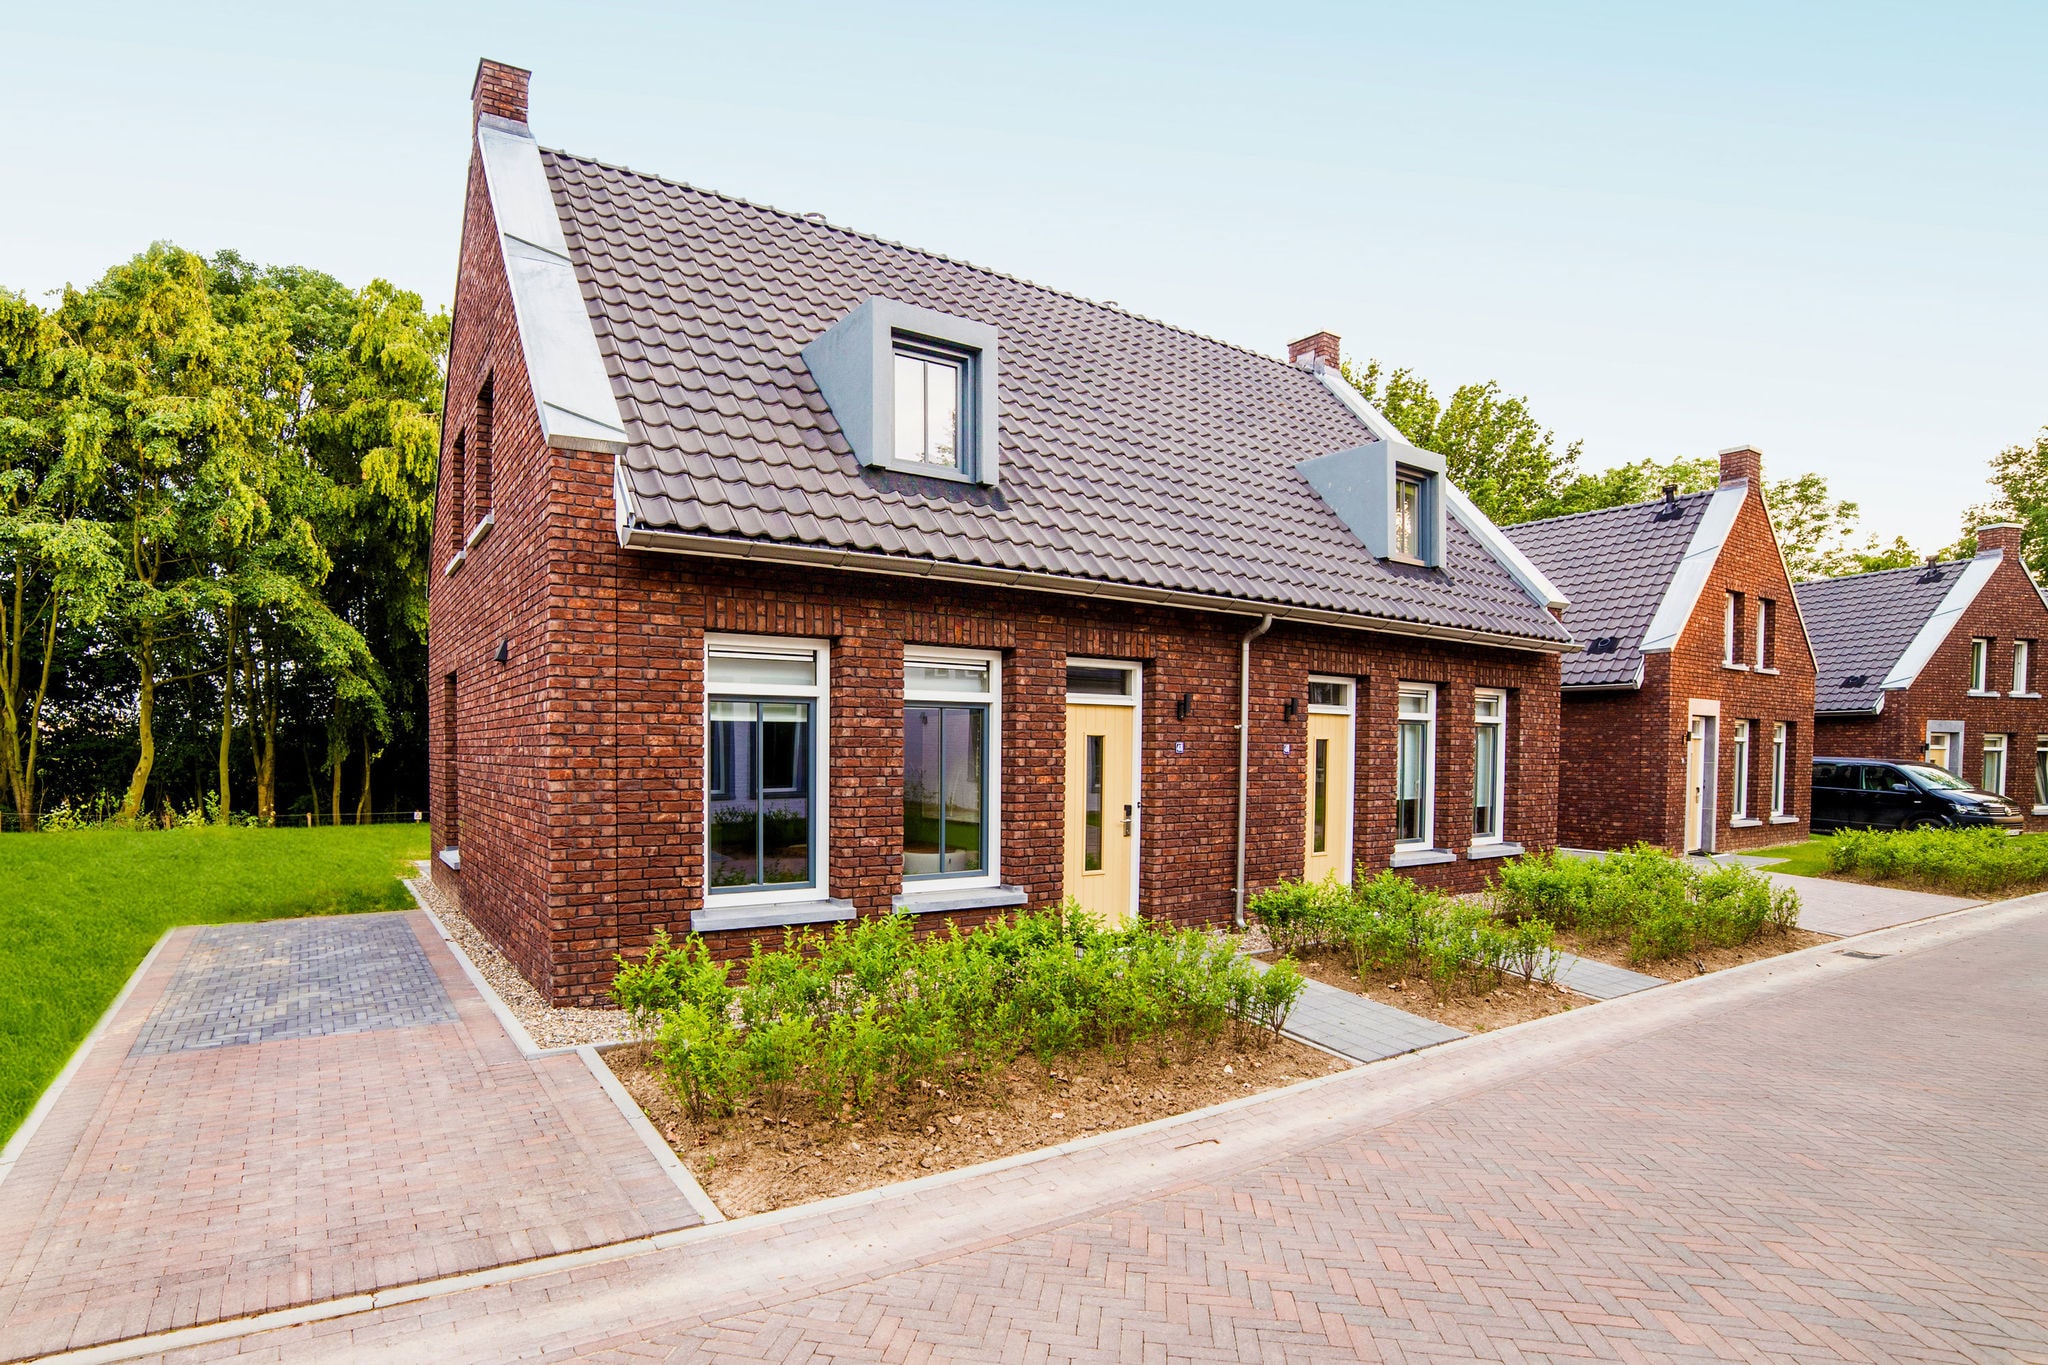 Villa with dishwasher, 4 km. from Maastricht